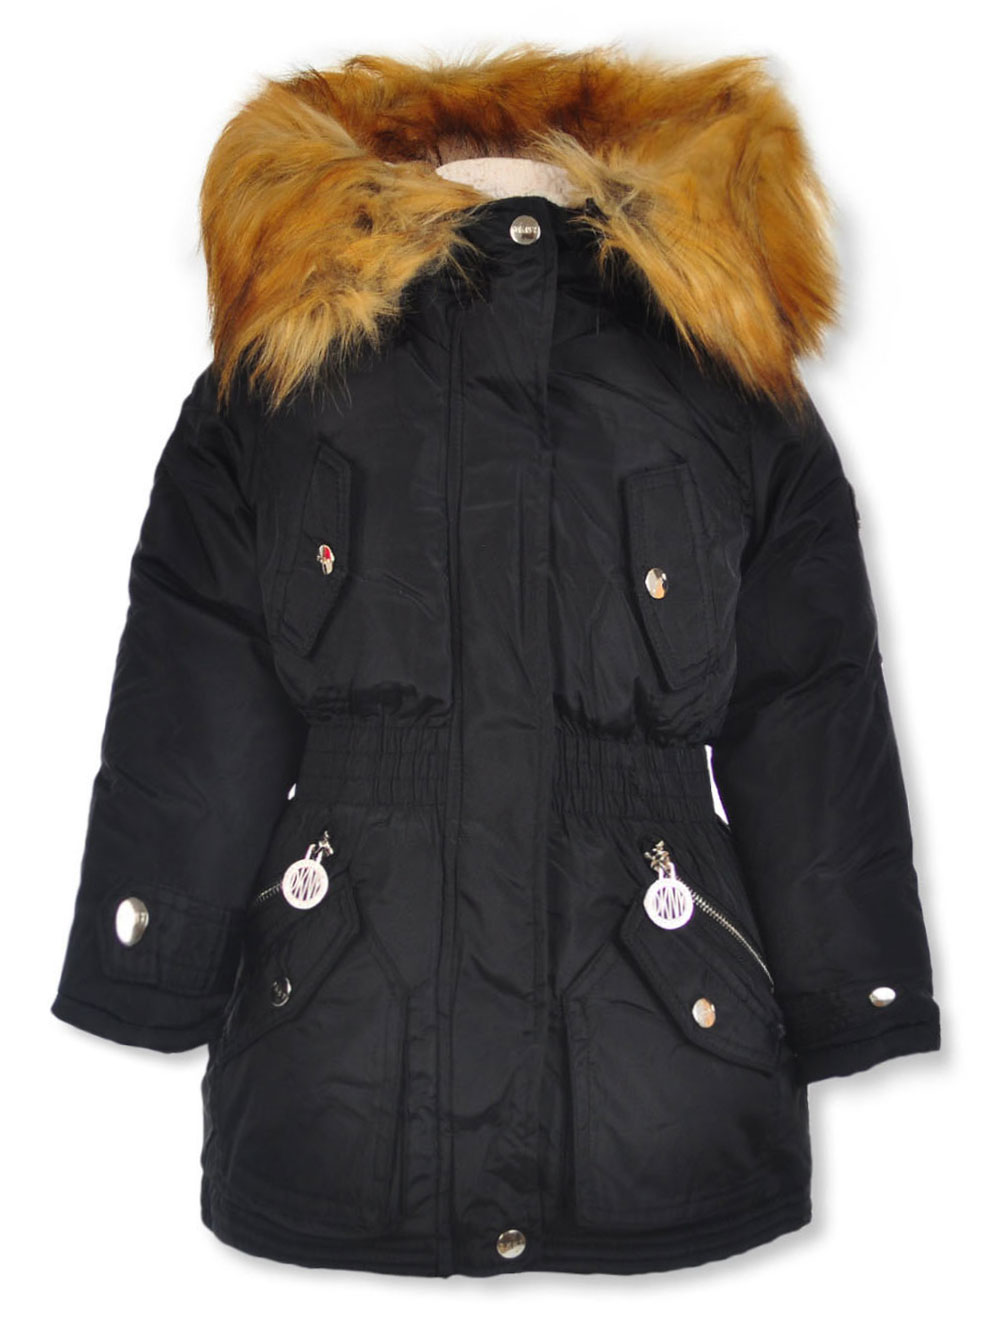 Size 5-6 Jackets Coats for Girls